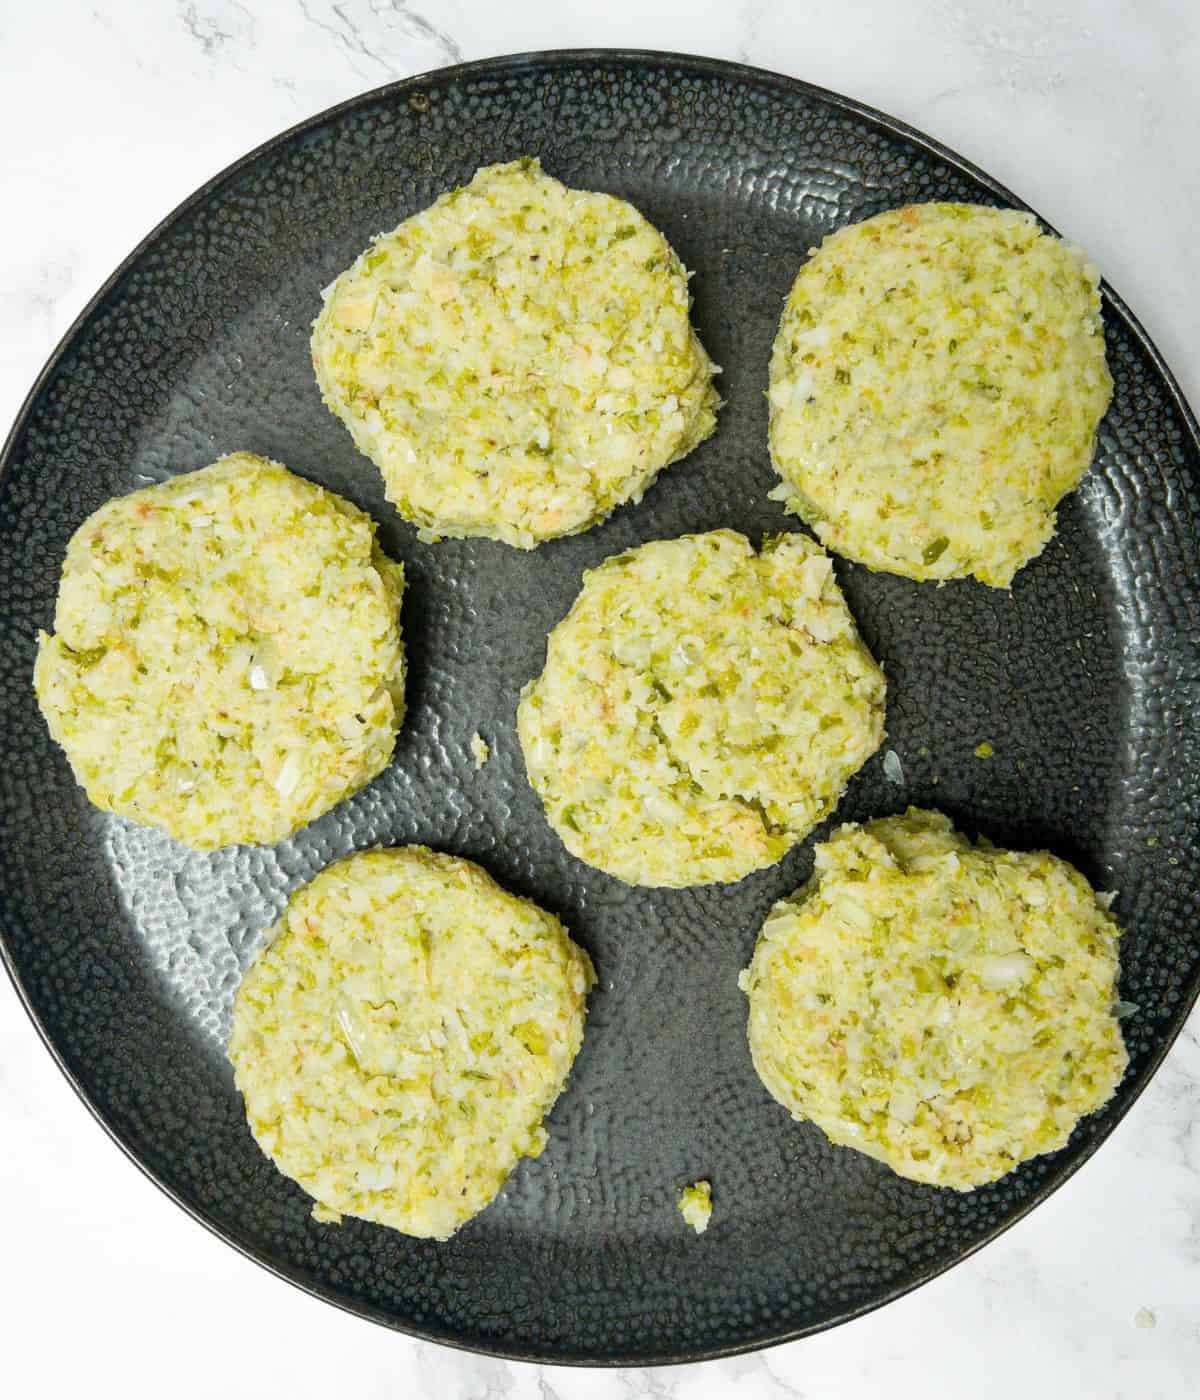 6 uncooked bubble and squeak cakes on a black plate.